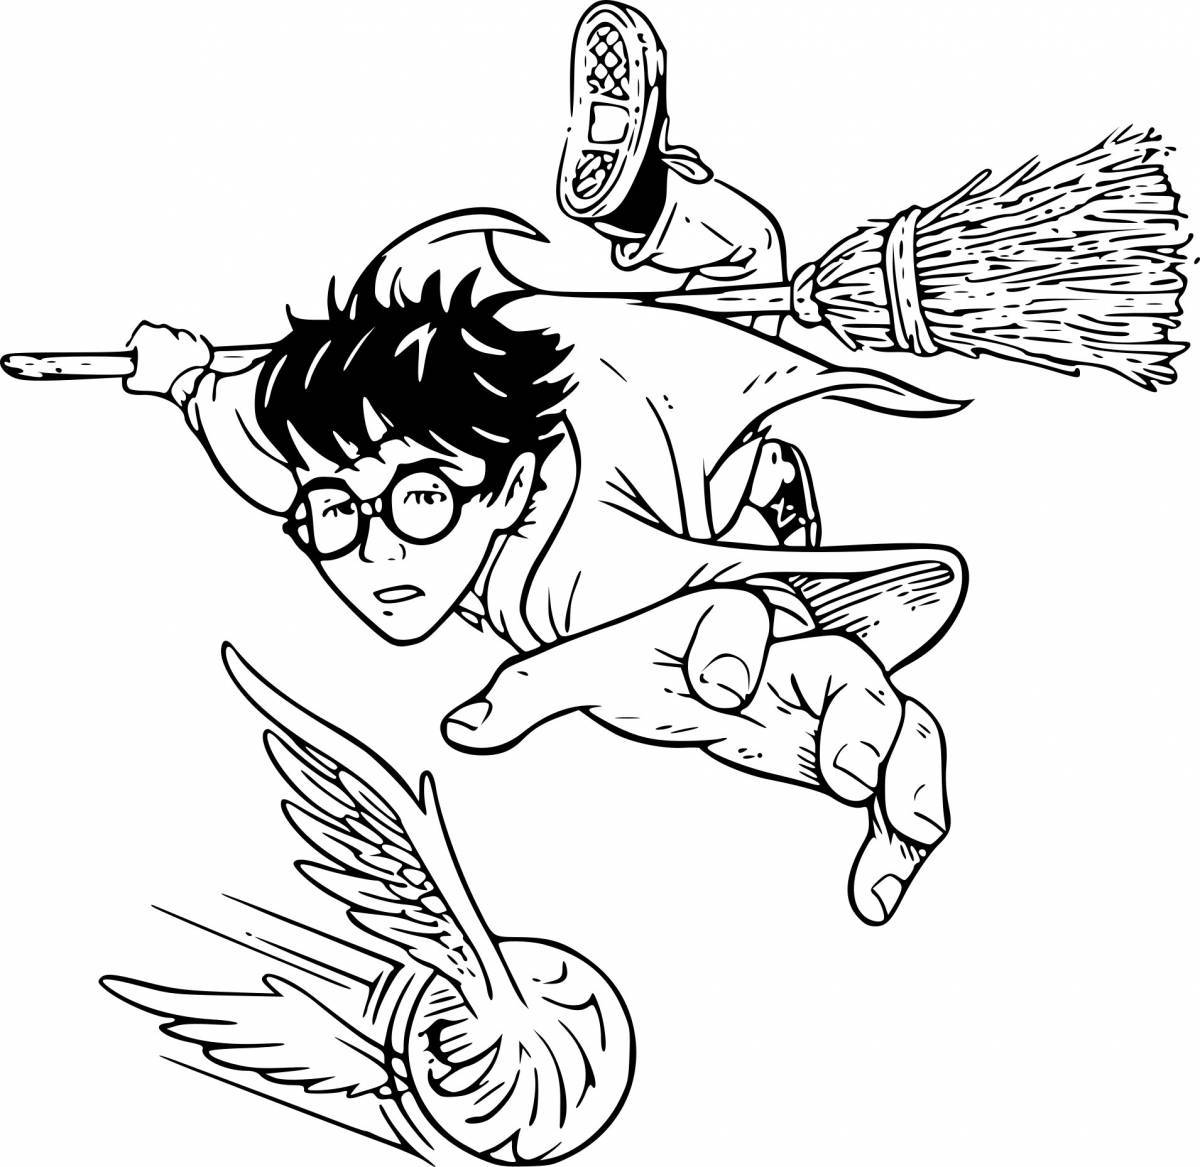 Harry potter cute coloring book